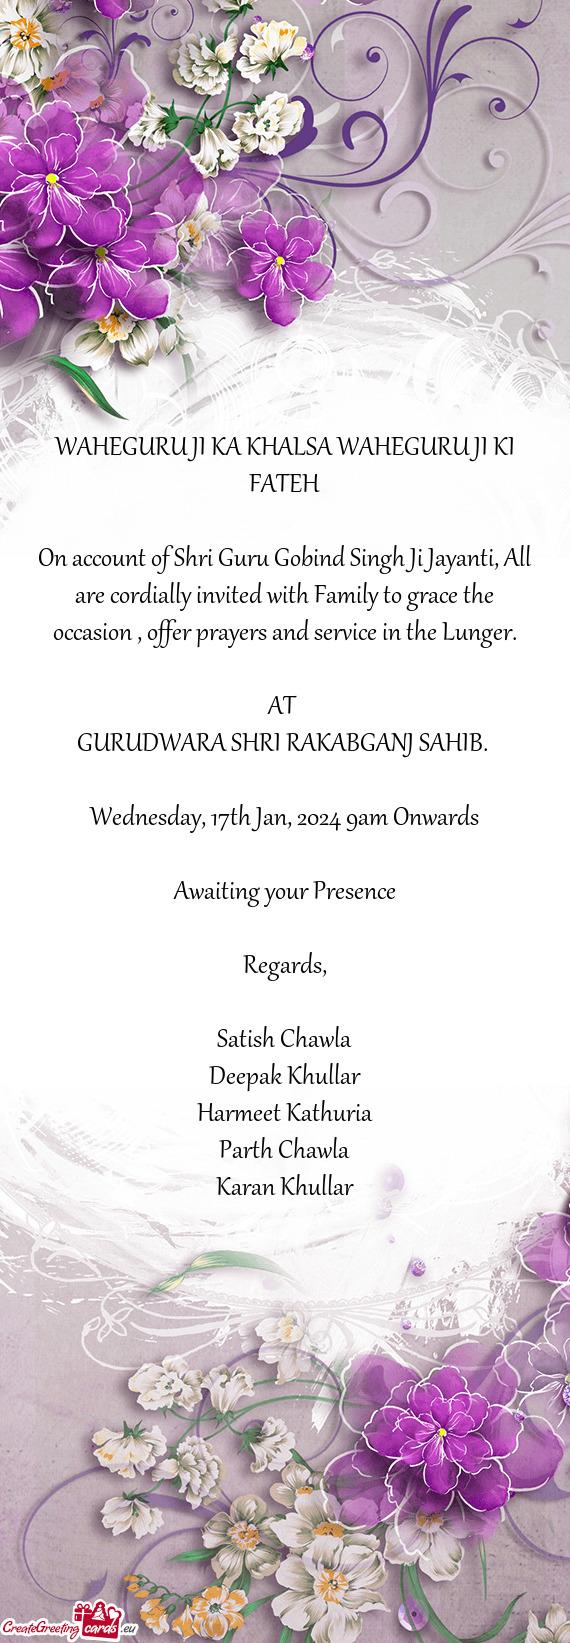 On account of Shri Guru Gobind Singh Ji Jayanti, All are cordially invited with Family to grace the